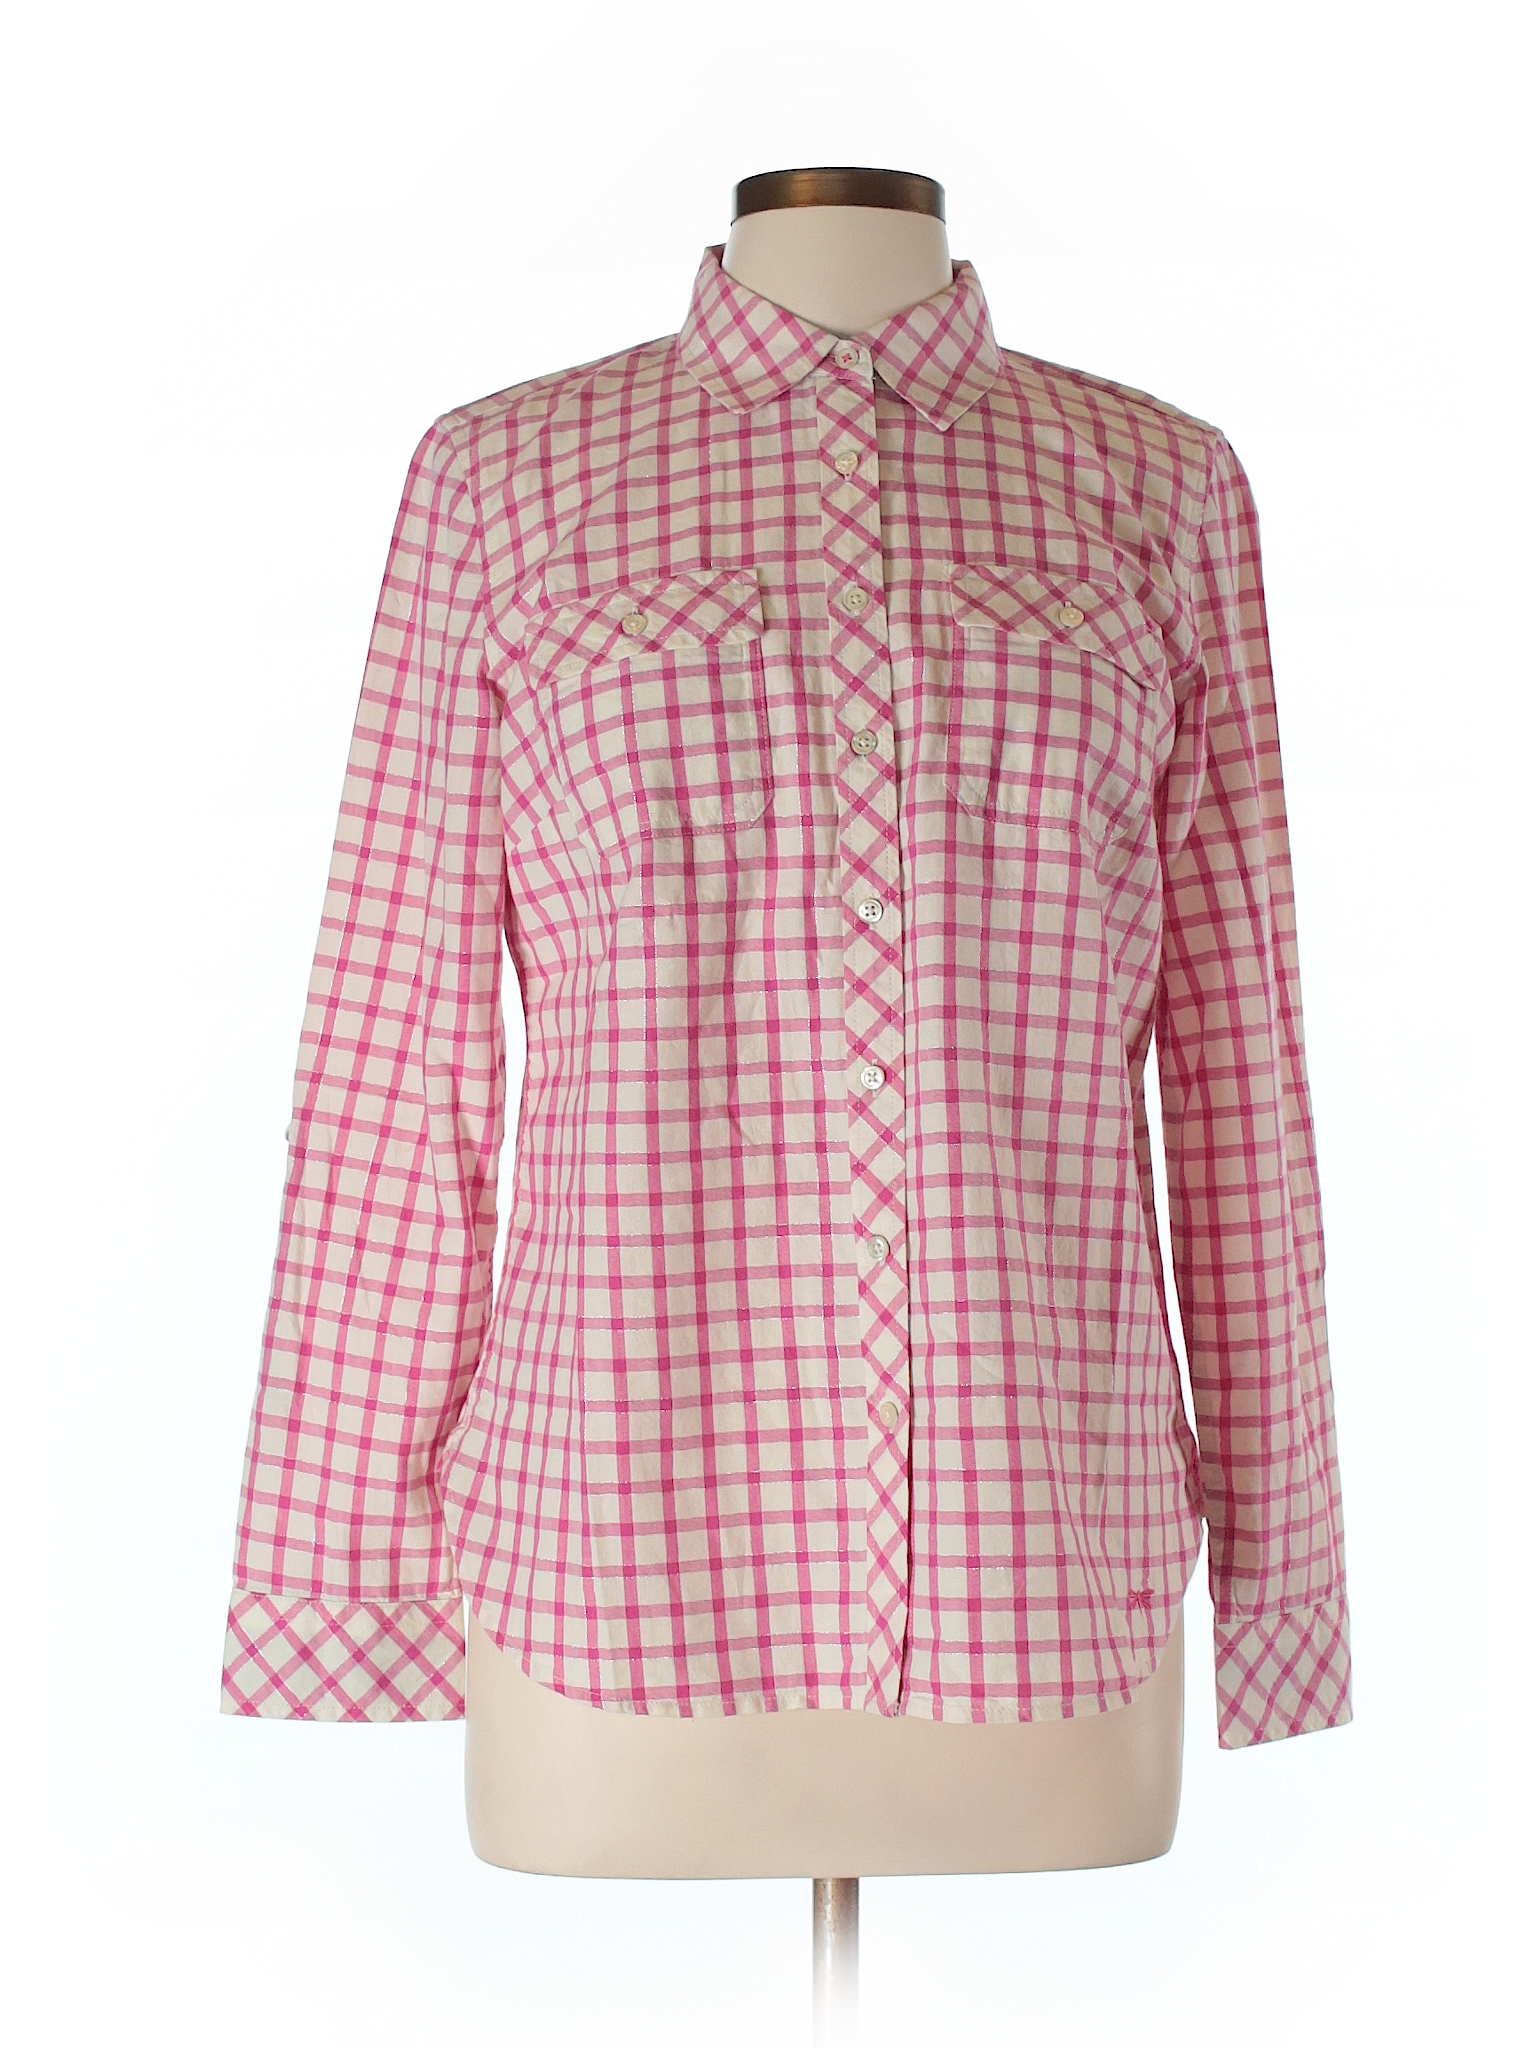 Talbots Checkered-gingham Pink Long Sleeve Button-Down Shirt Size M ...